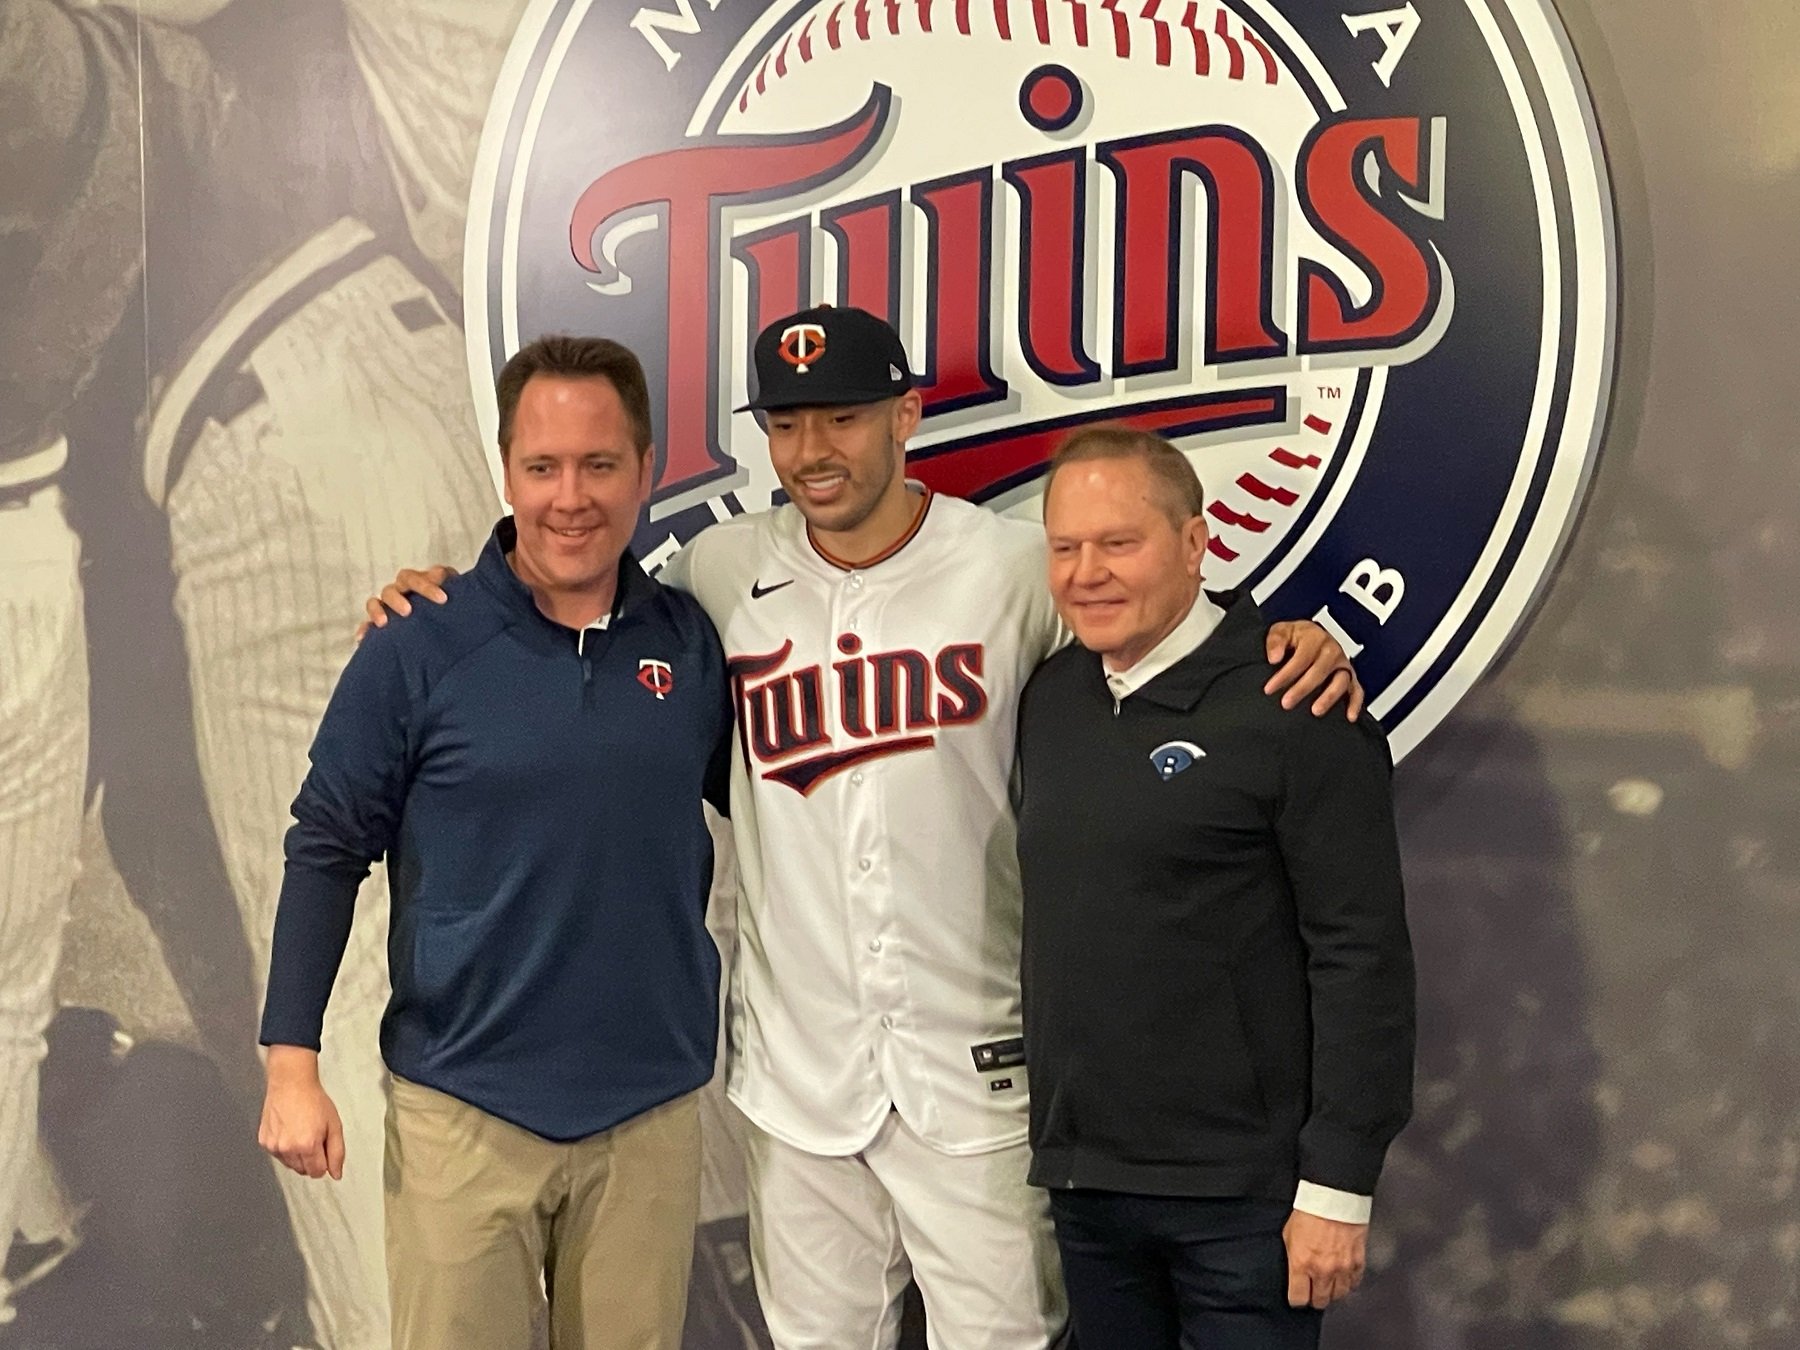 What Carlos Correa said in his introductory Twins press conference